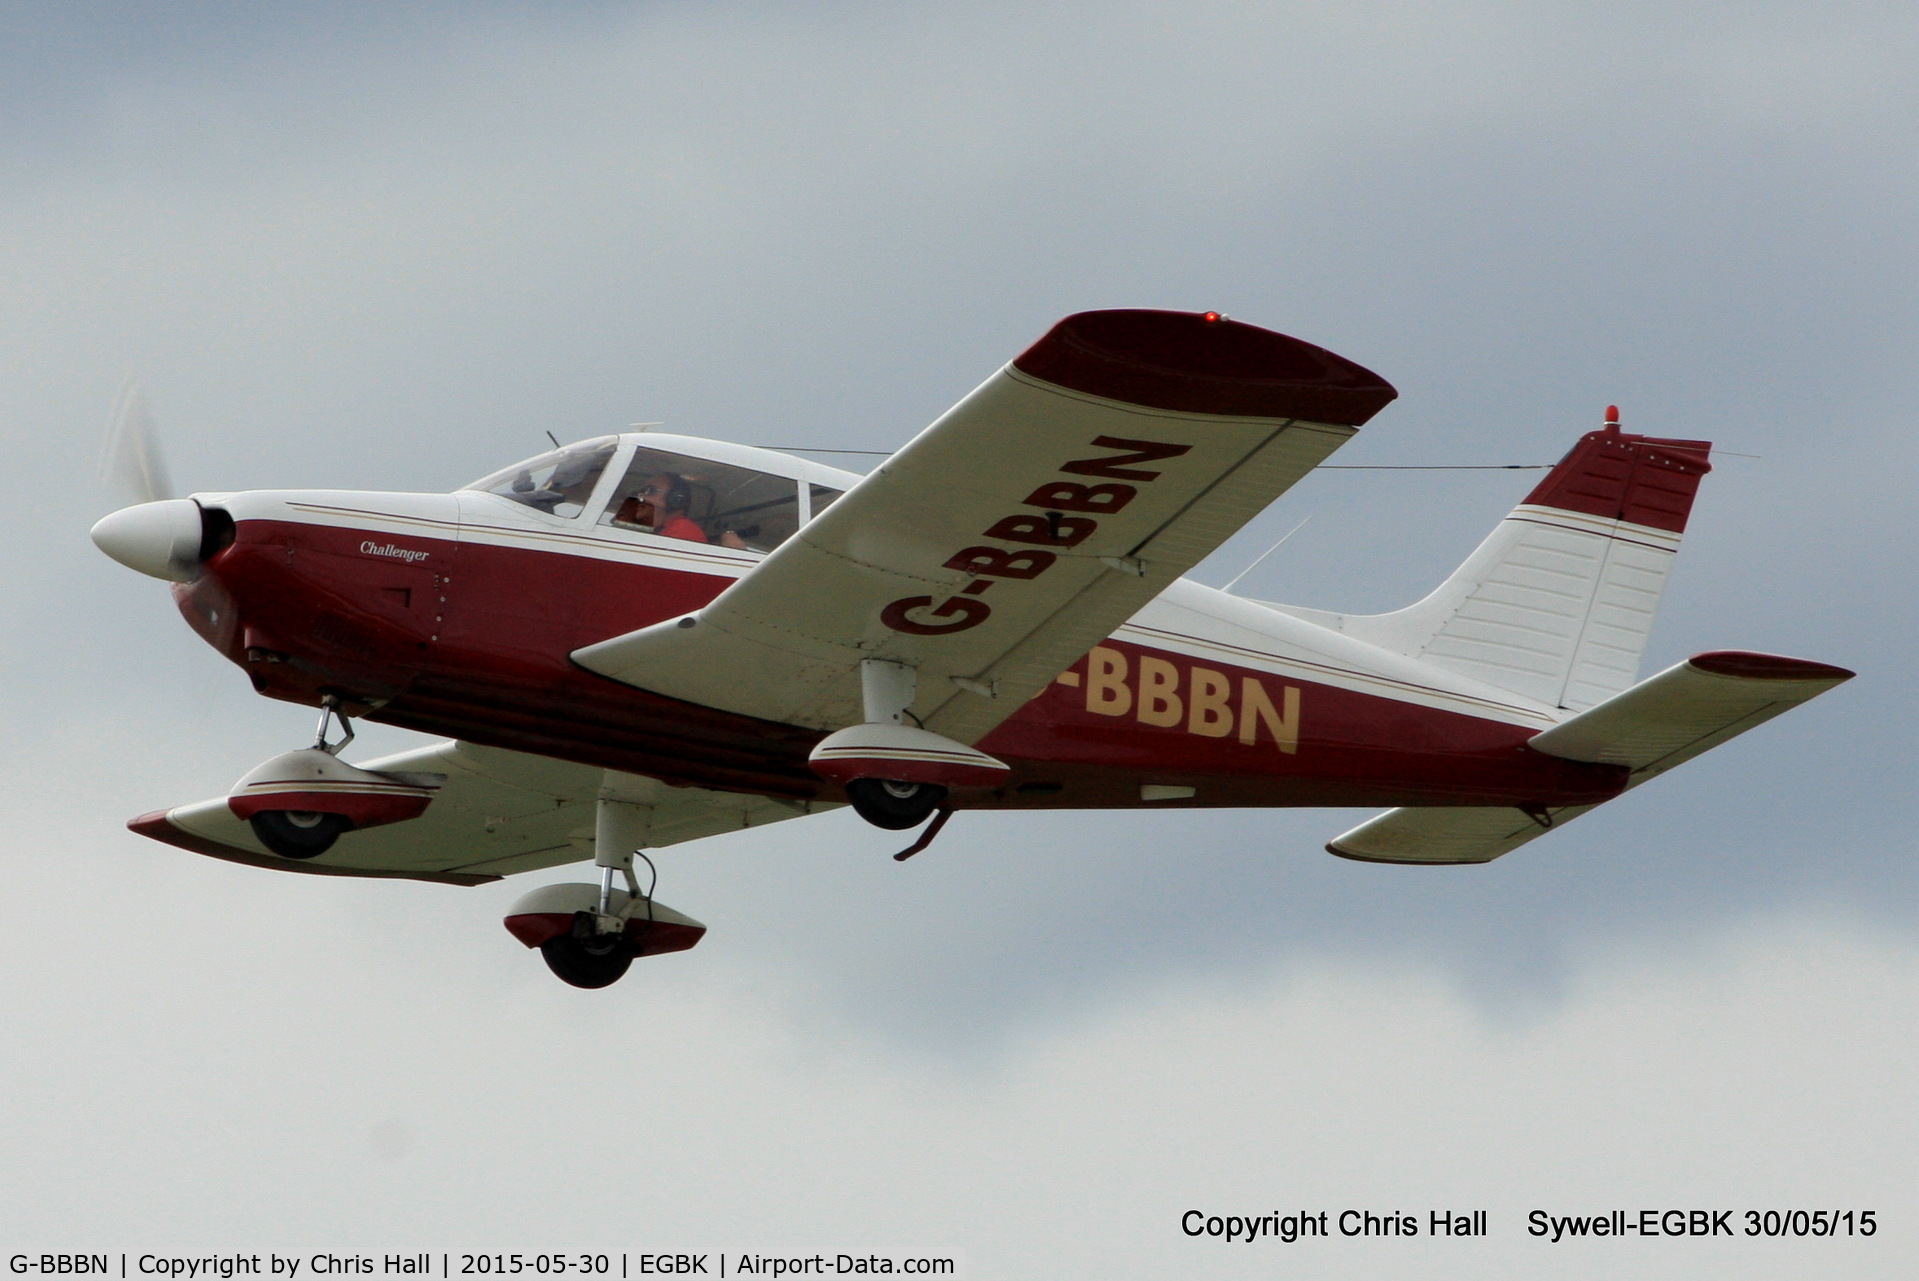 G-BBBN, 1973 Piper PA-28-180 Cherokee Challenger C/N 28-7305365, at Aeroexpo 2015